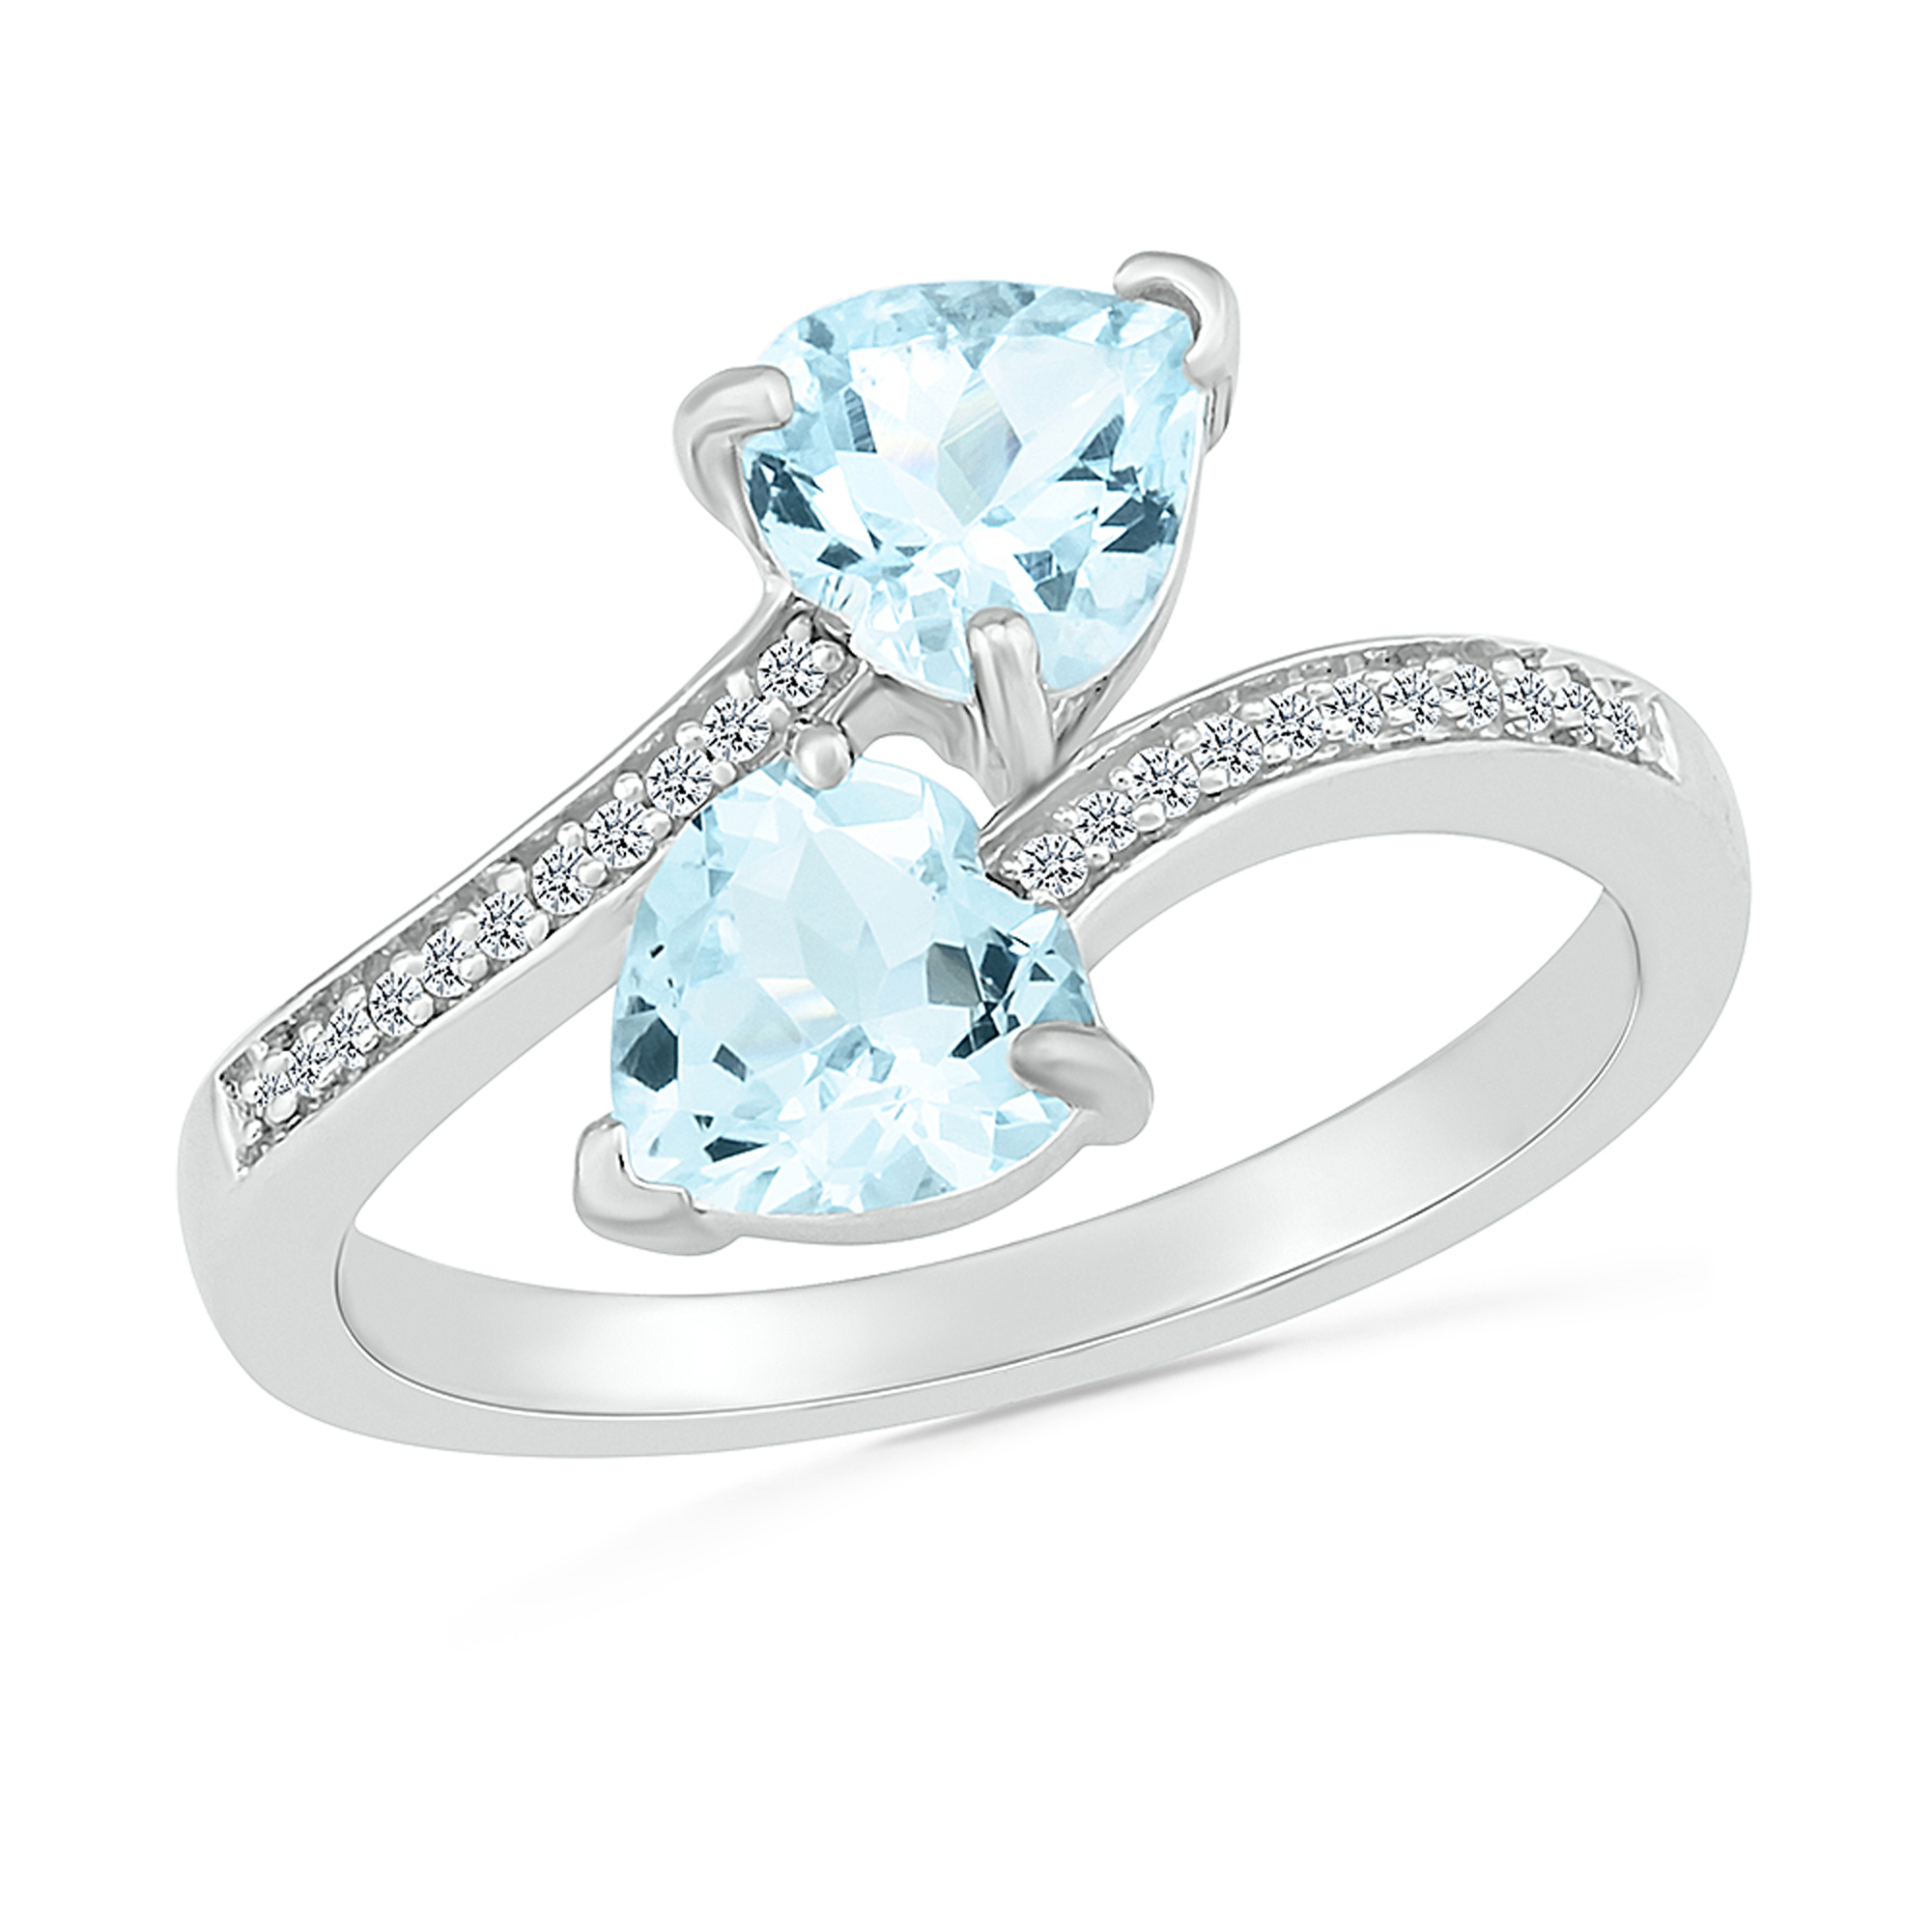 Double Heart-Shaped Aquamarine Diamond Accent Sterling Silver Ring - Size 5